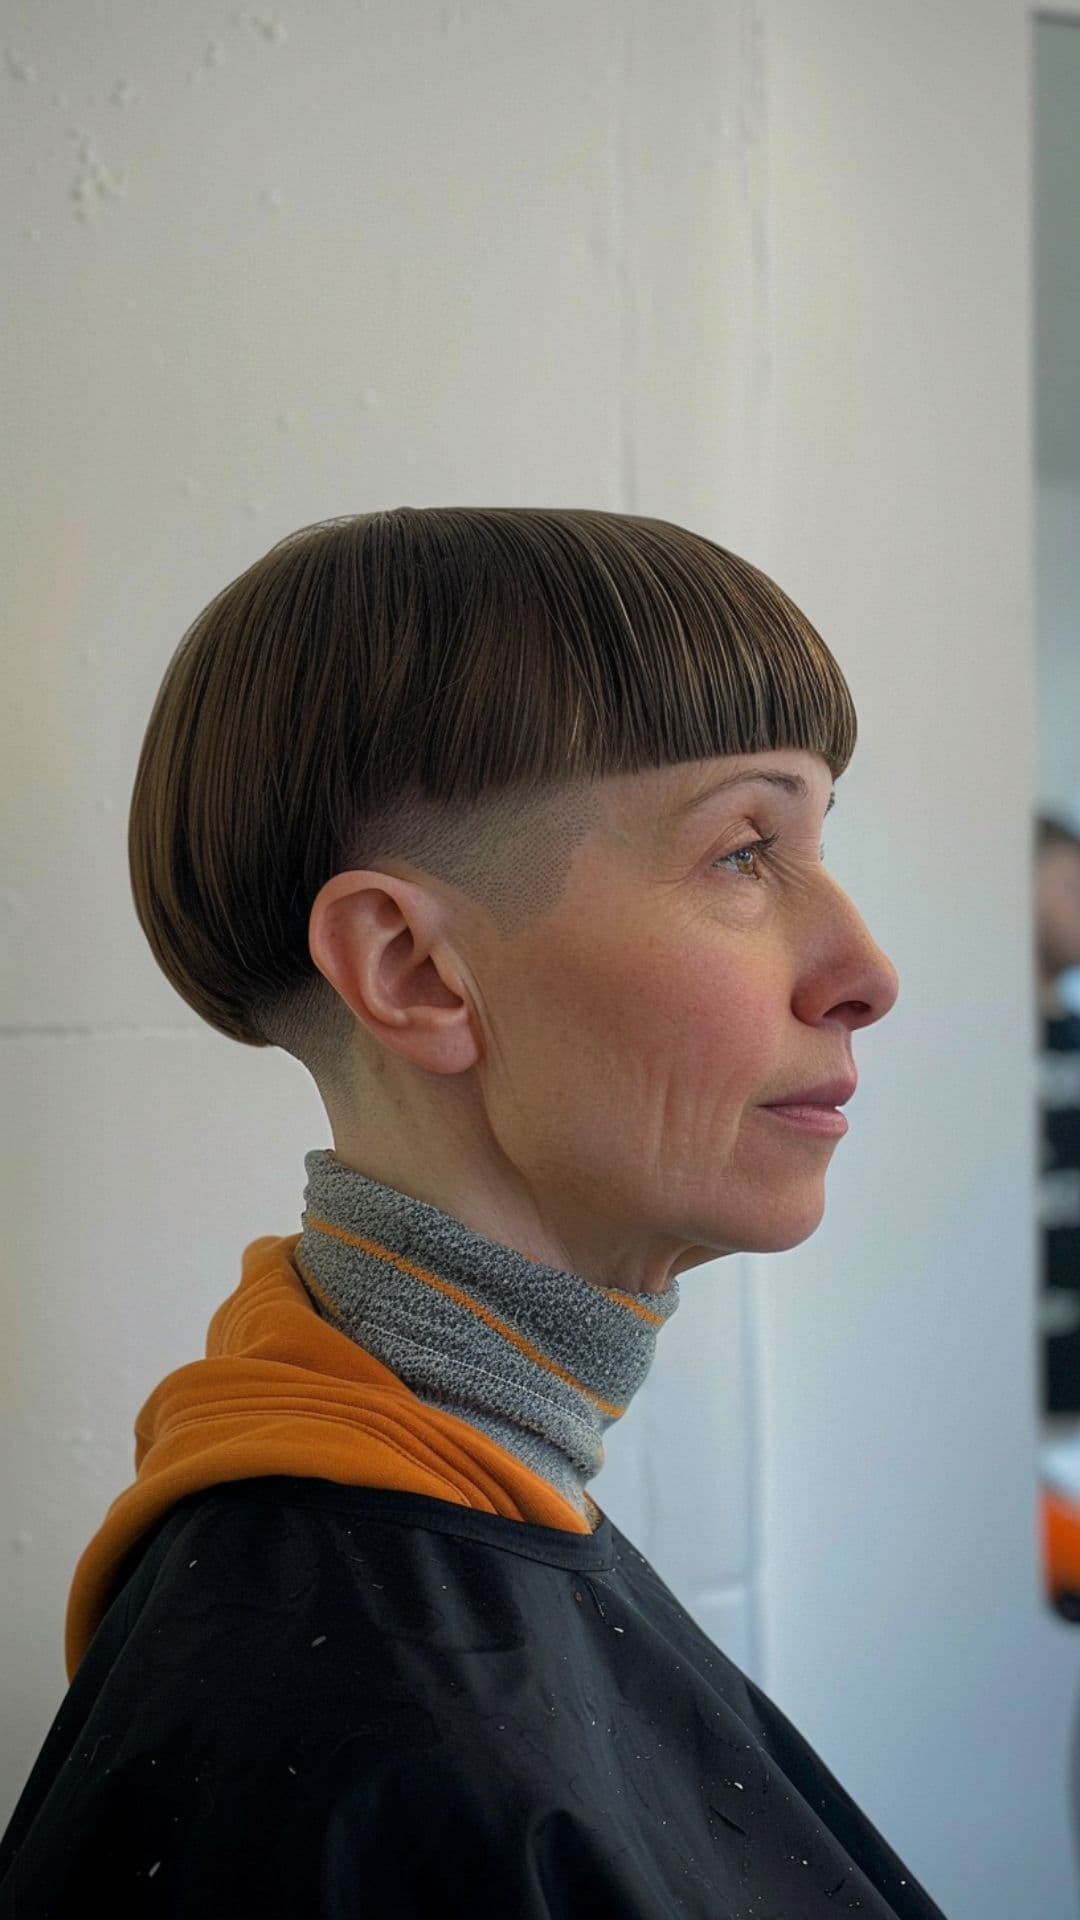 An old woman modelling an edgy bowl cut.